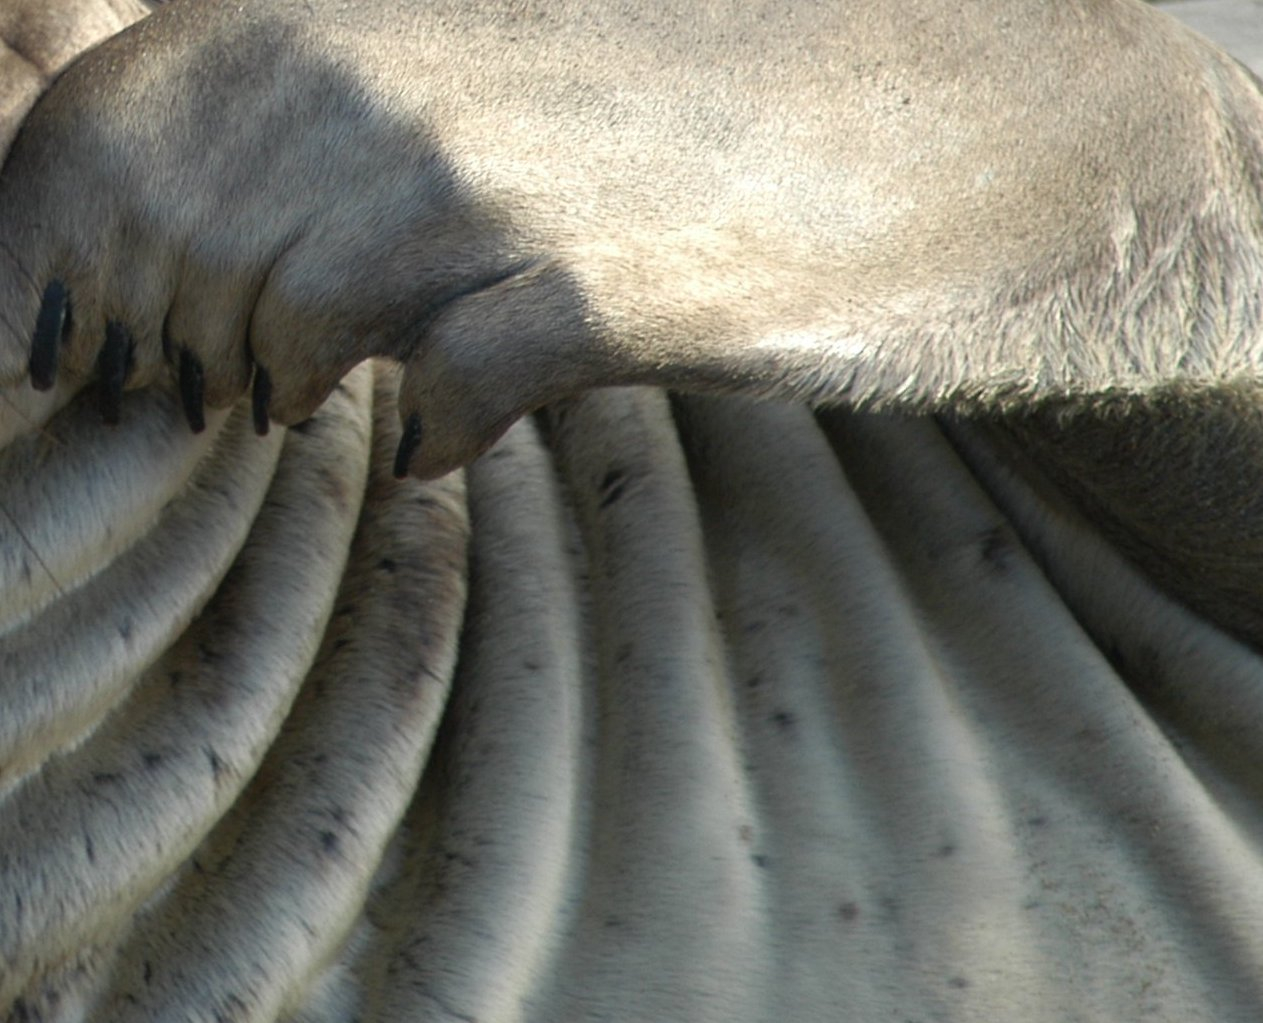 What is this?  Folds of skin on neck of sea elephant